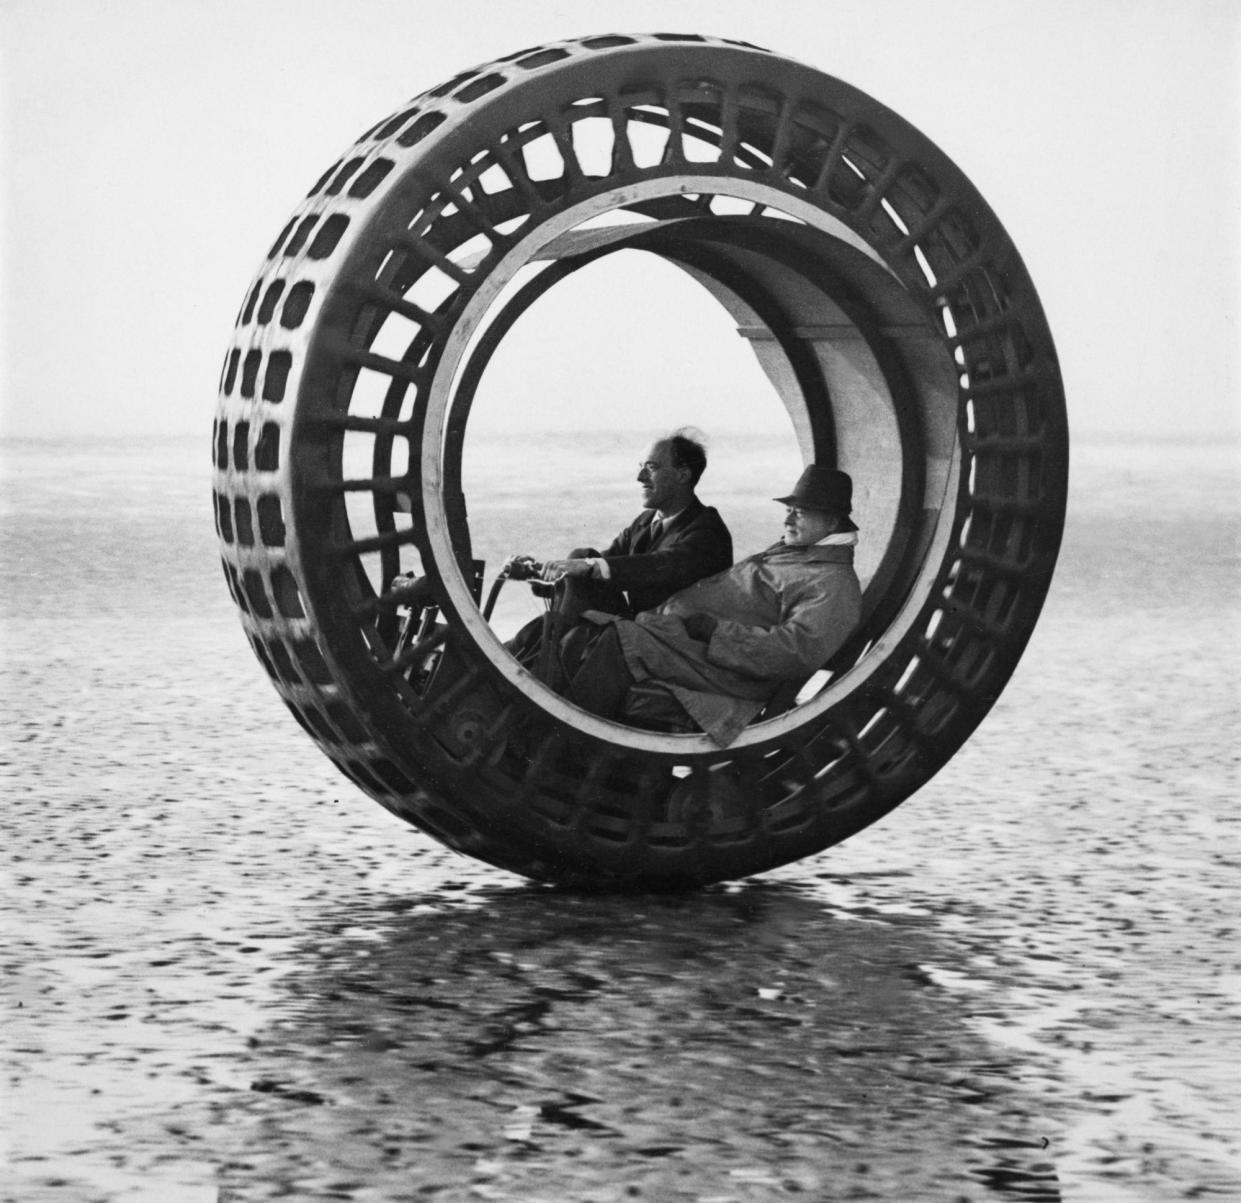 <span>Inventor JA Purves takes a friend for a whirl in his Dynasphere, 1930.</span><span>Photograph: Fox Photos/Getty Images</span>